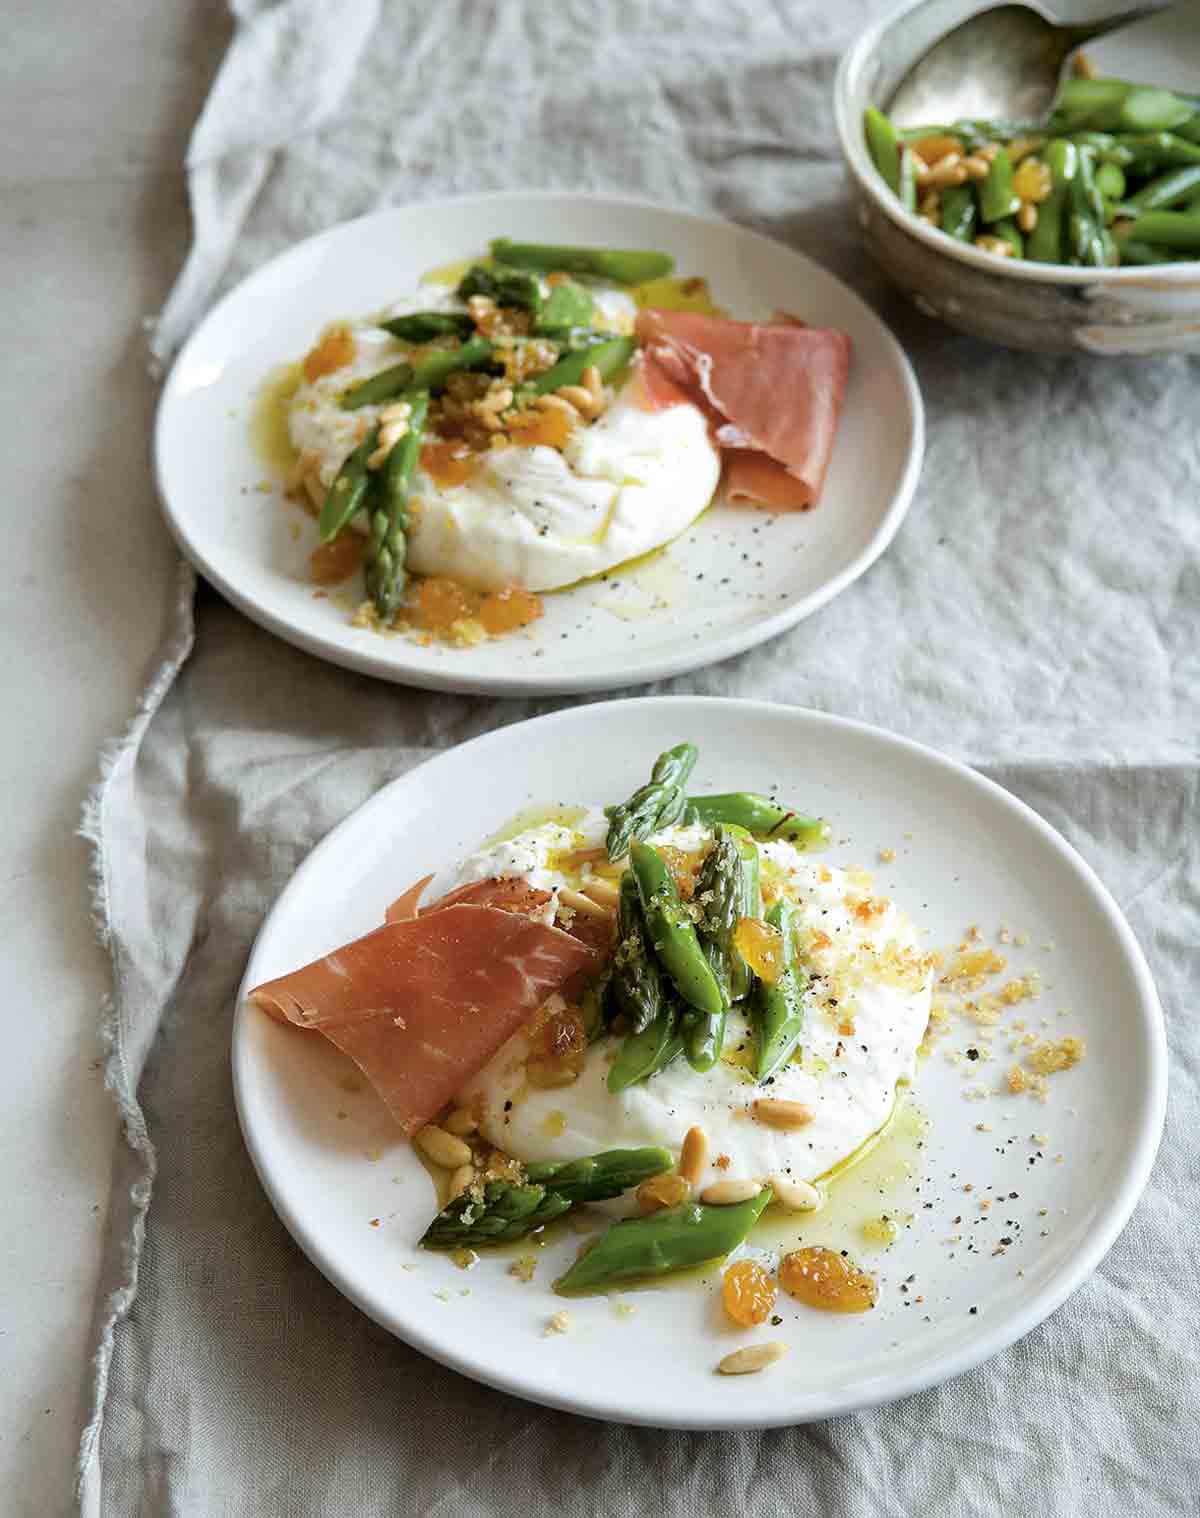 Two plates with burrata topped with asparagus, pine nuts, raisins, and prosciutto.